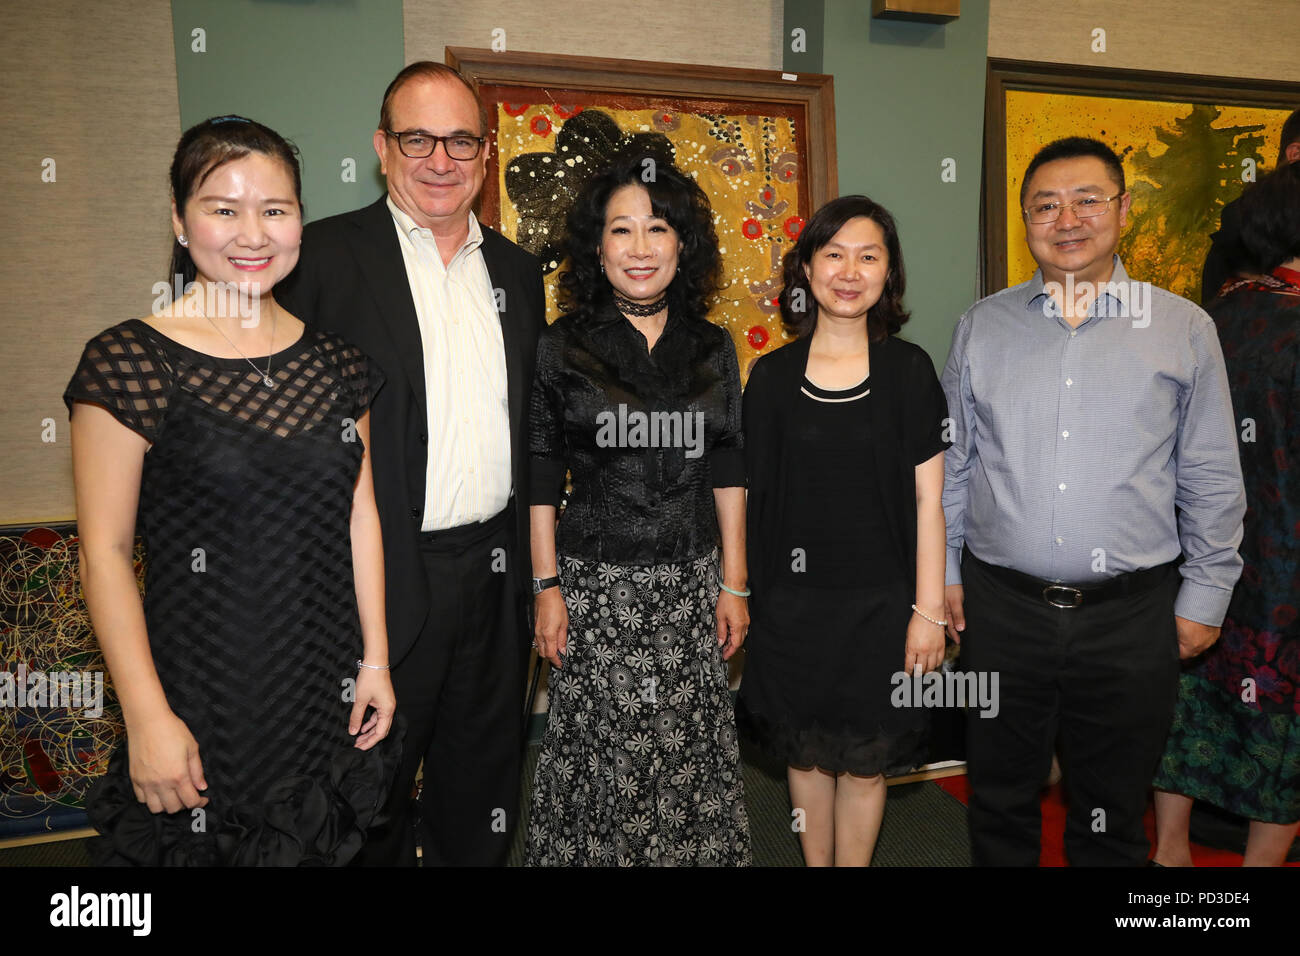 Beverly Hills, California, USA. 5th August, 2018. Cathy Cheng, Bob Huff, Mei Mei Huff, and guests attending the Pengfei He 'Creative Imagination' Art Exhibition at Beverly Hills Library in Beverly Hills, California. Credit: Sheri Determan/Alamy Live News Stock Photo